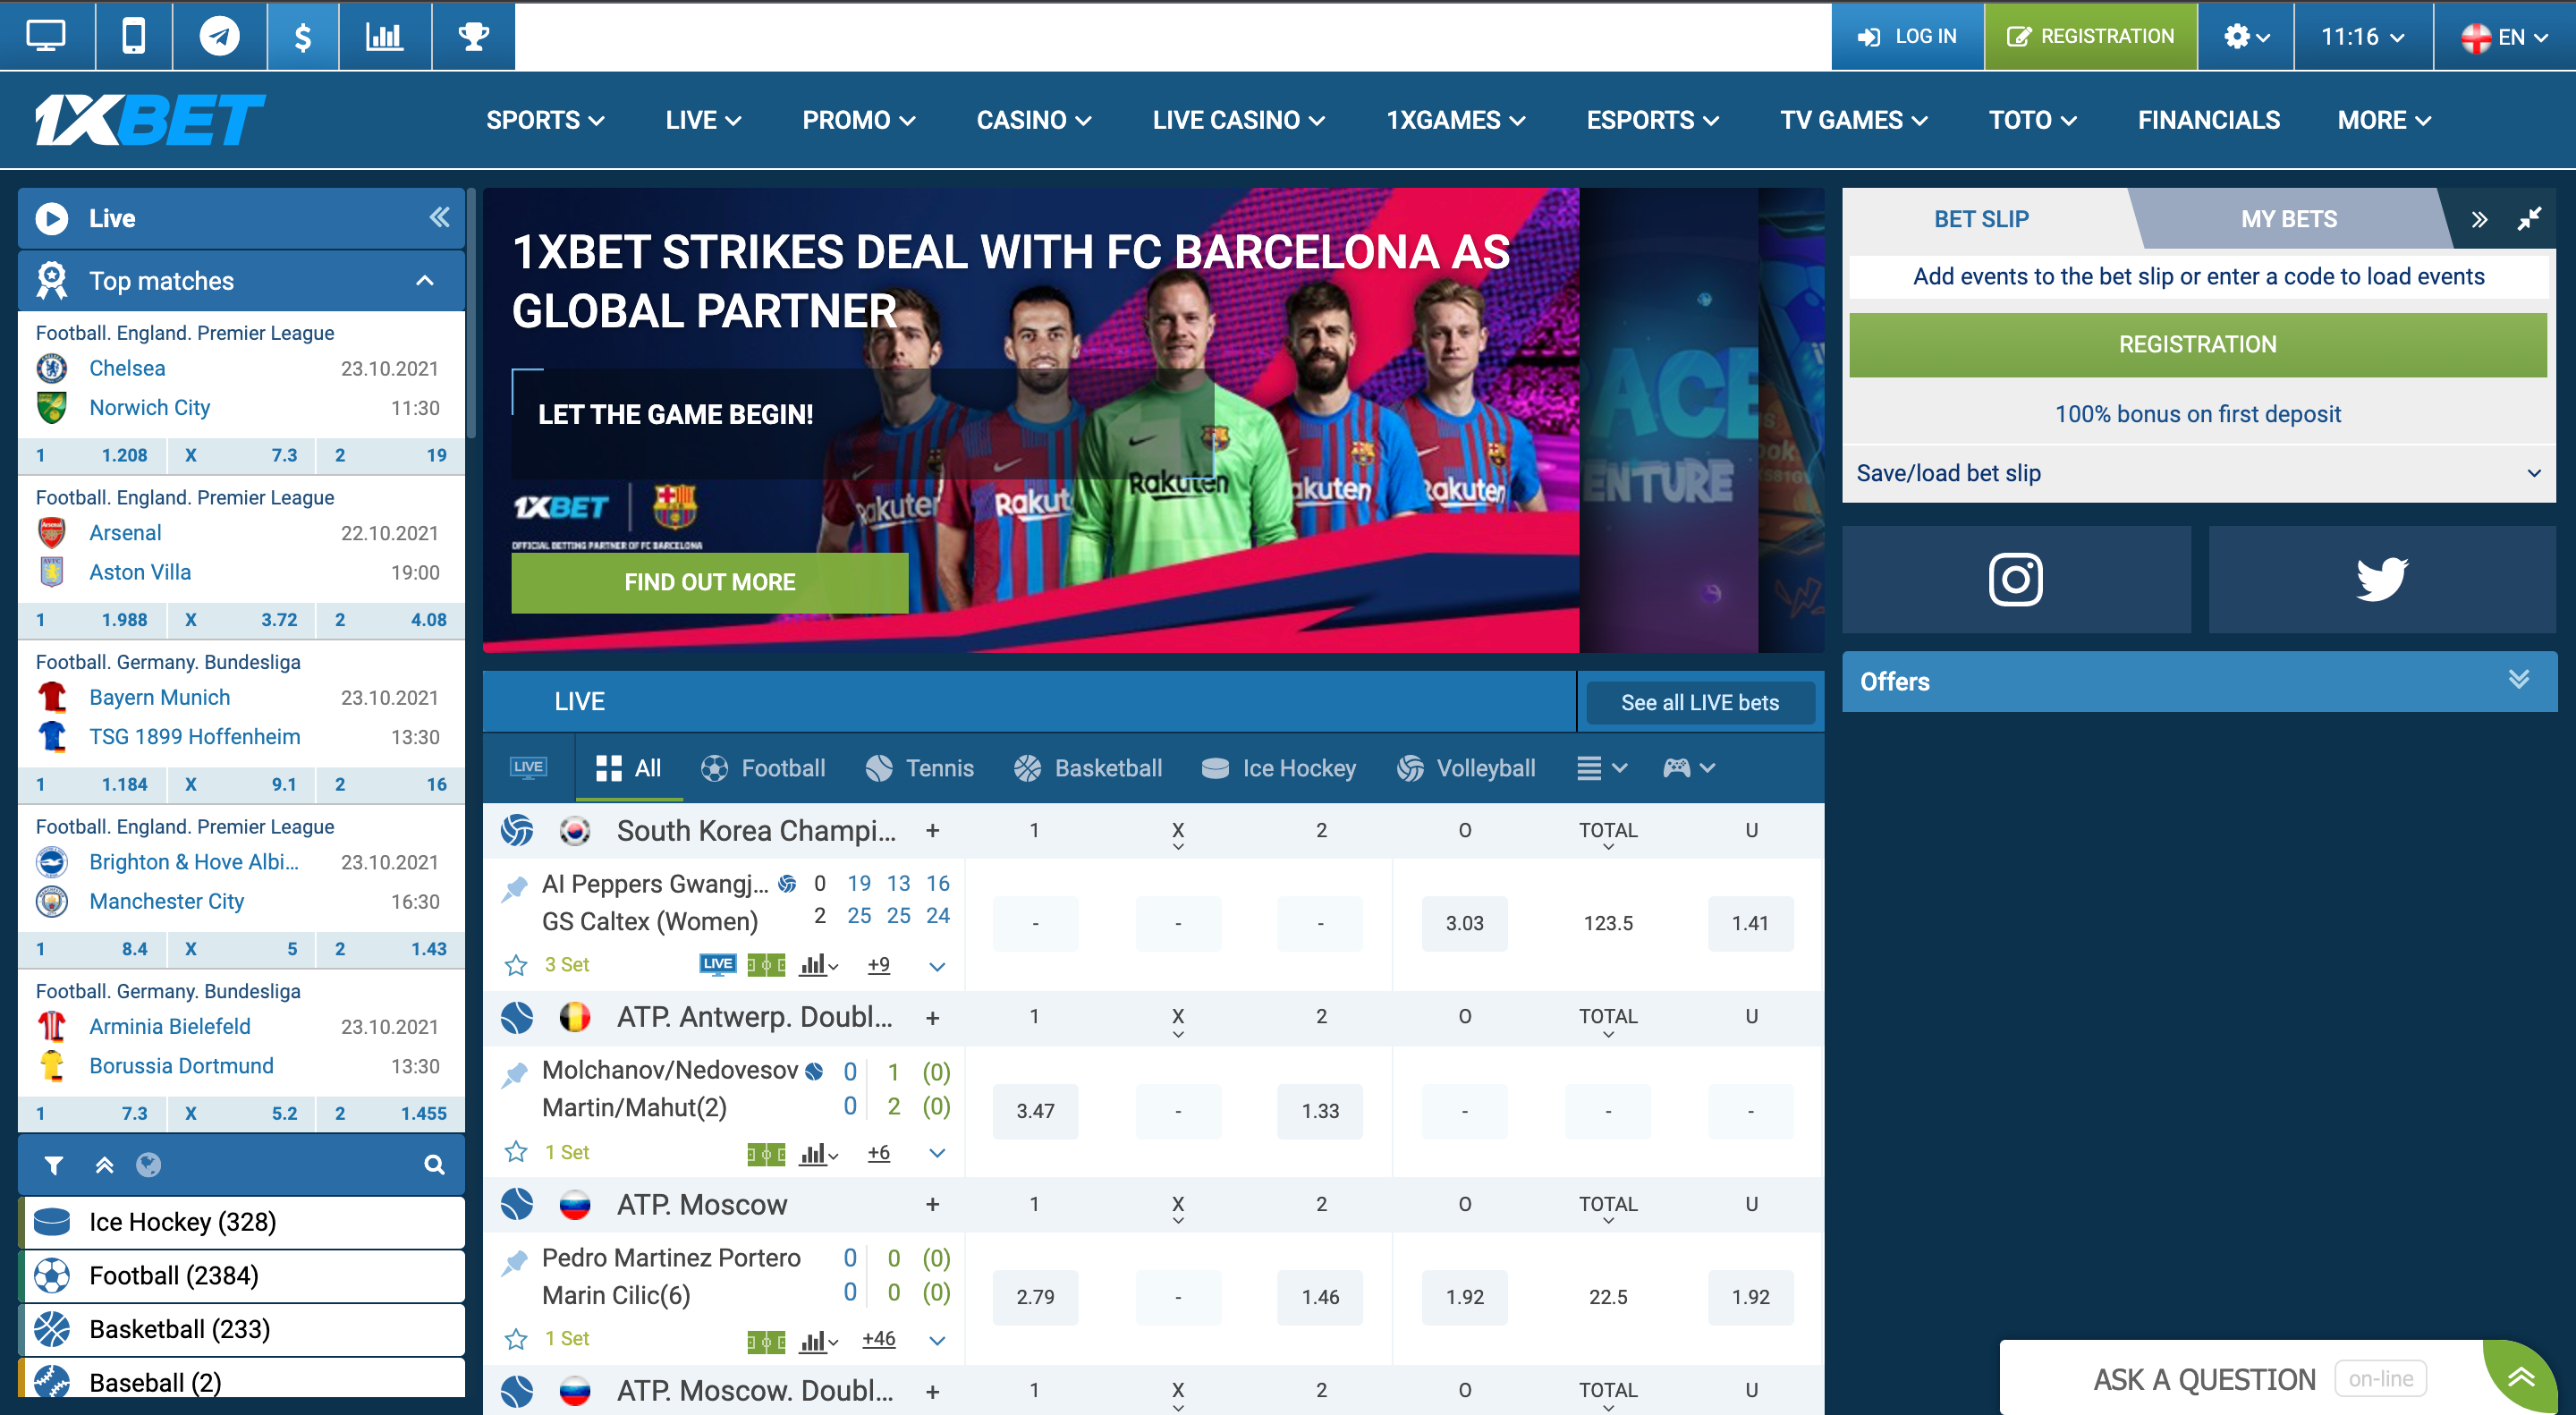 5 Incredible sports betting Thailand Examples